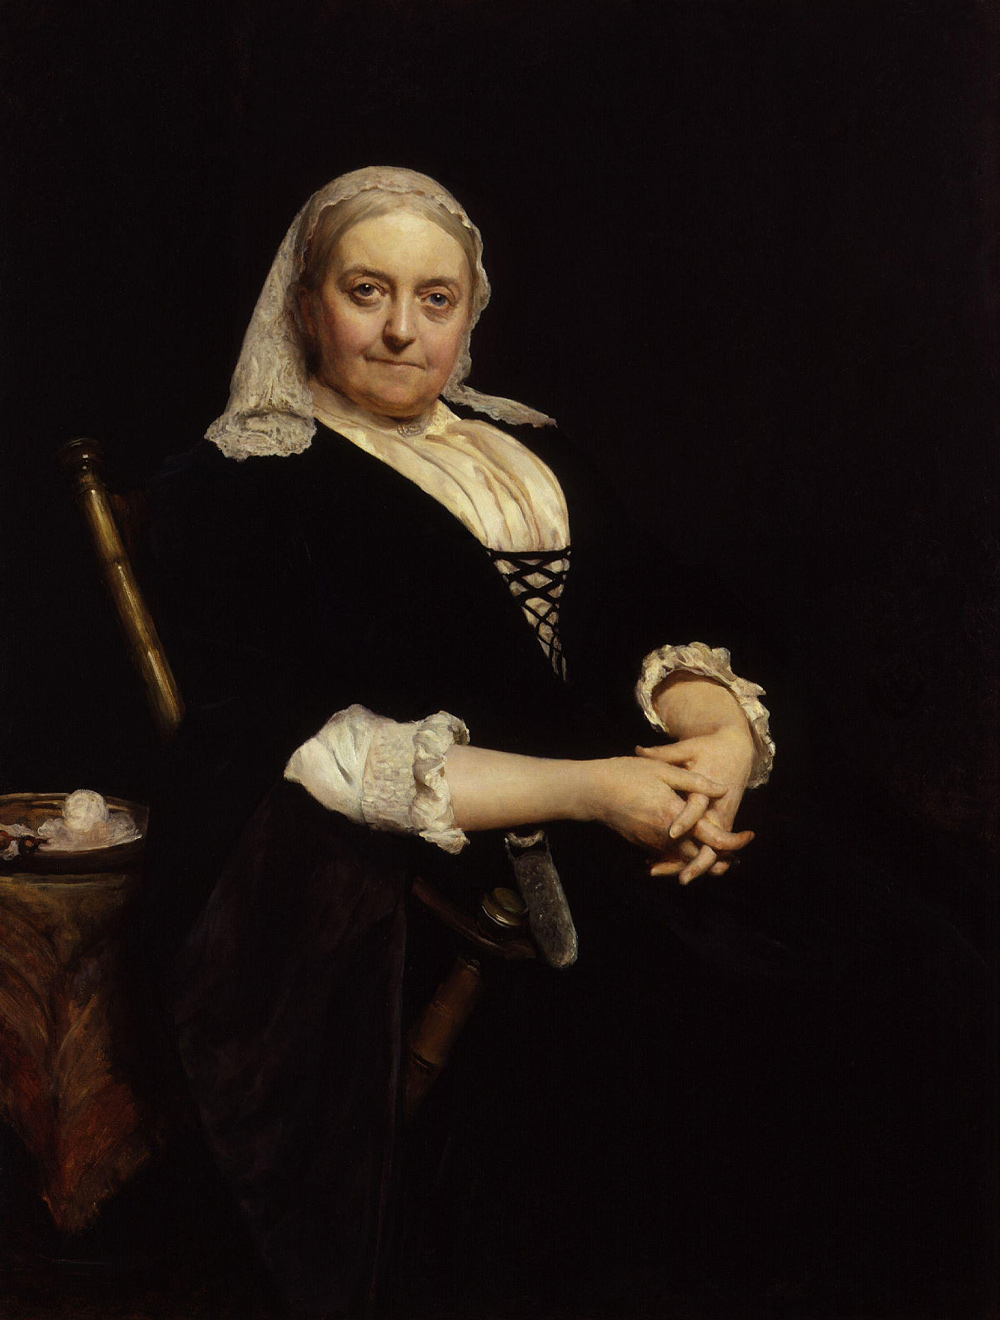 Author Mrs Craik – Dinah Maria Mulock before her marriage – may have visited Wareham through a link to Mary Mayer. Both were from the Potteries but Mary moved to Dorset after marrying into a family of clay merchants